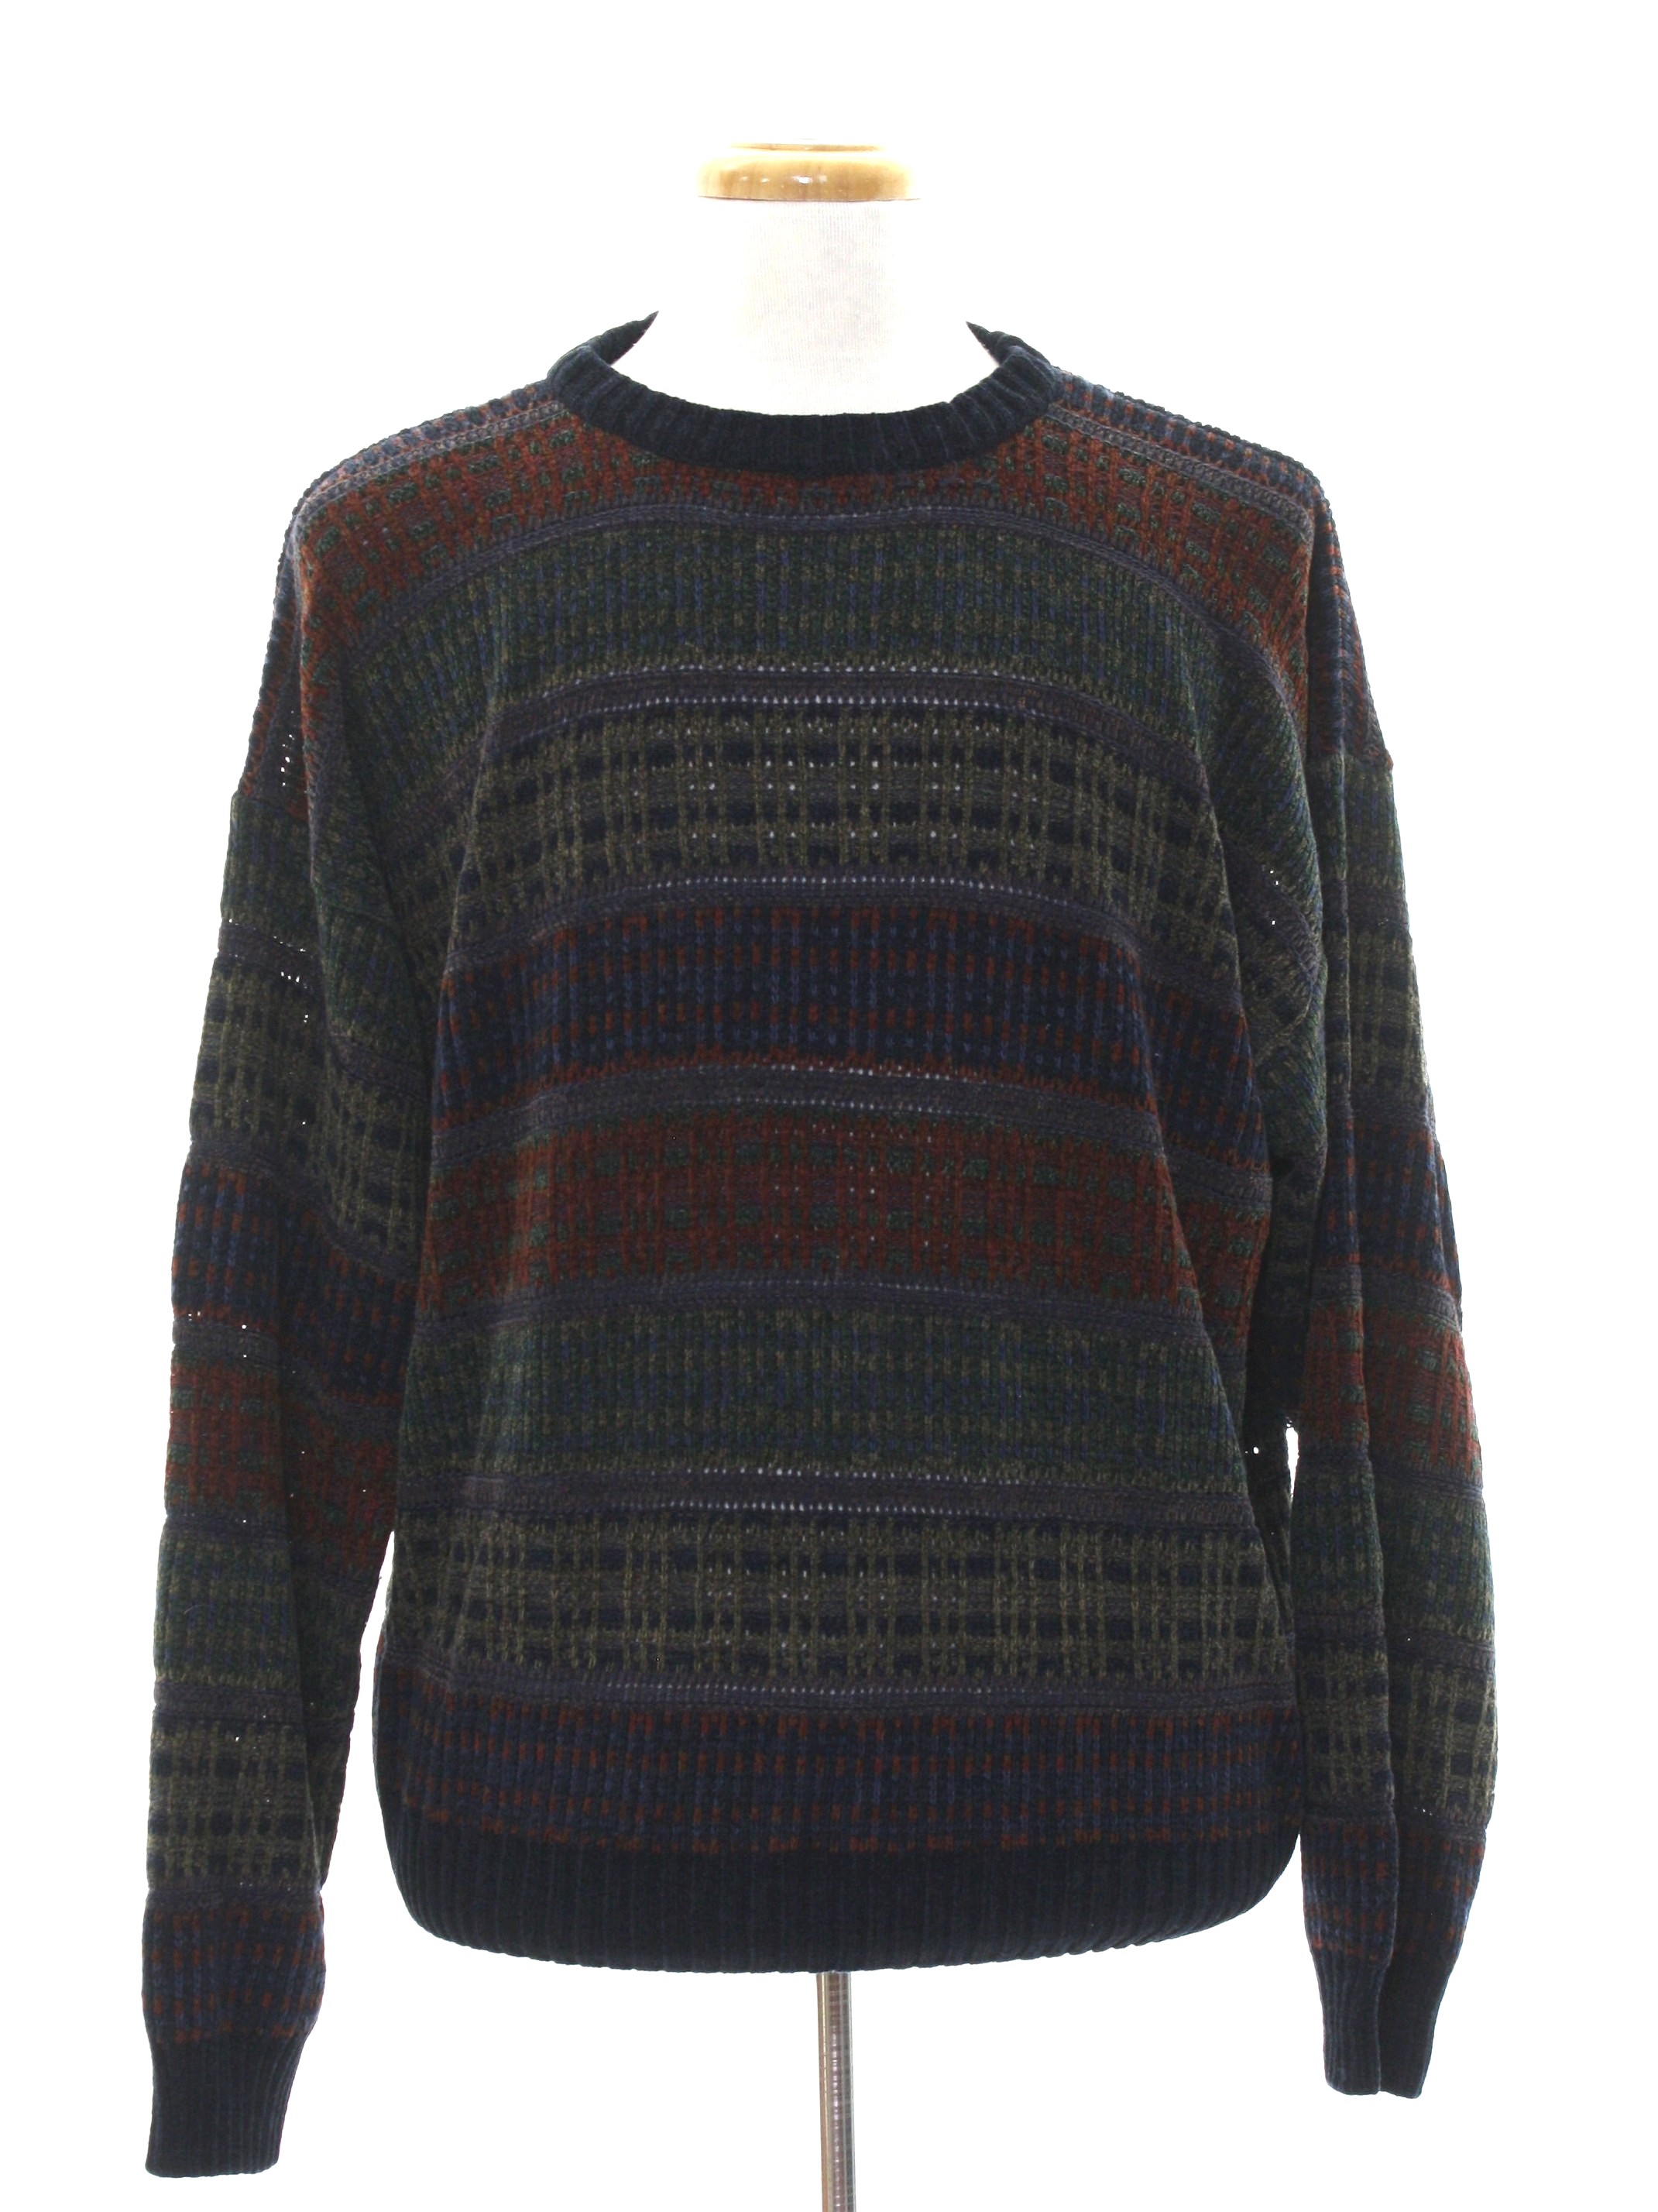 Vintage 80s Sweater: Late 80s or Early 90s -Geoffrey Beene- Mens ...